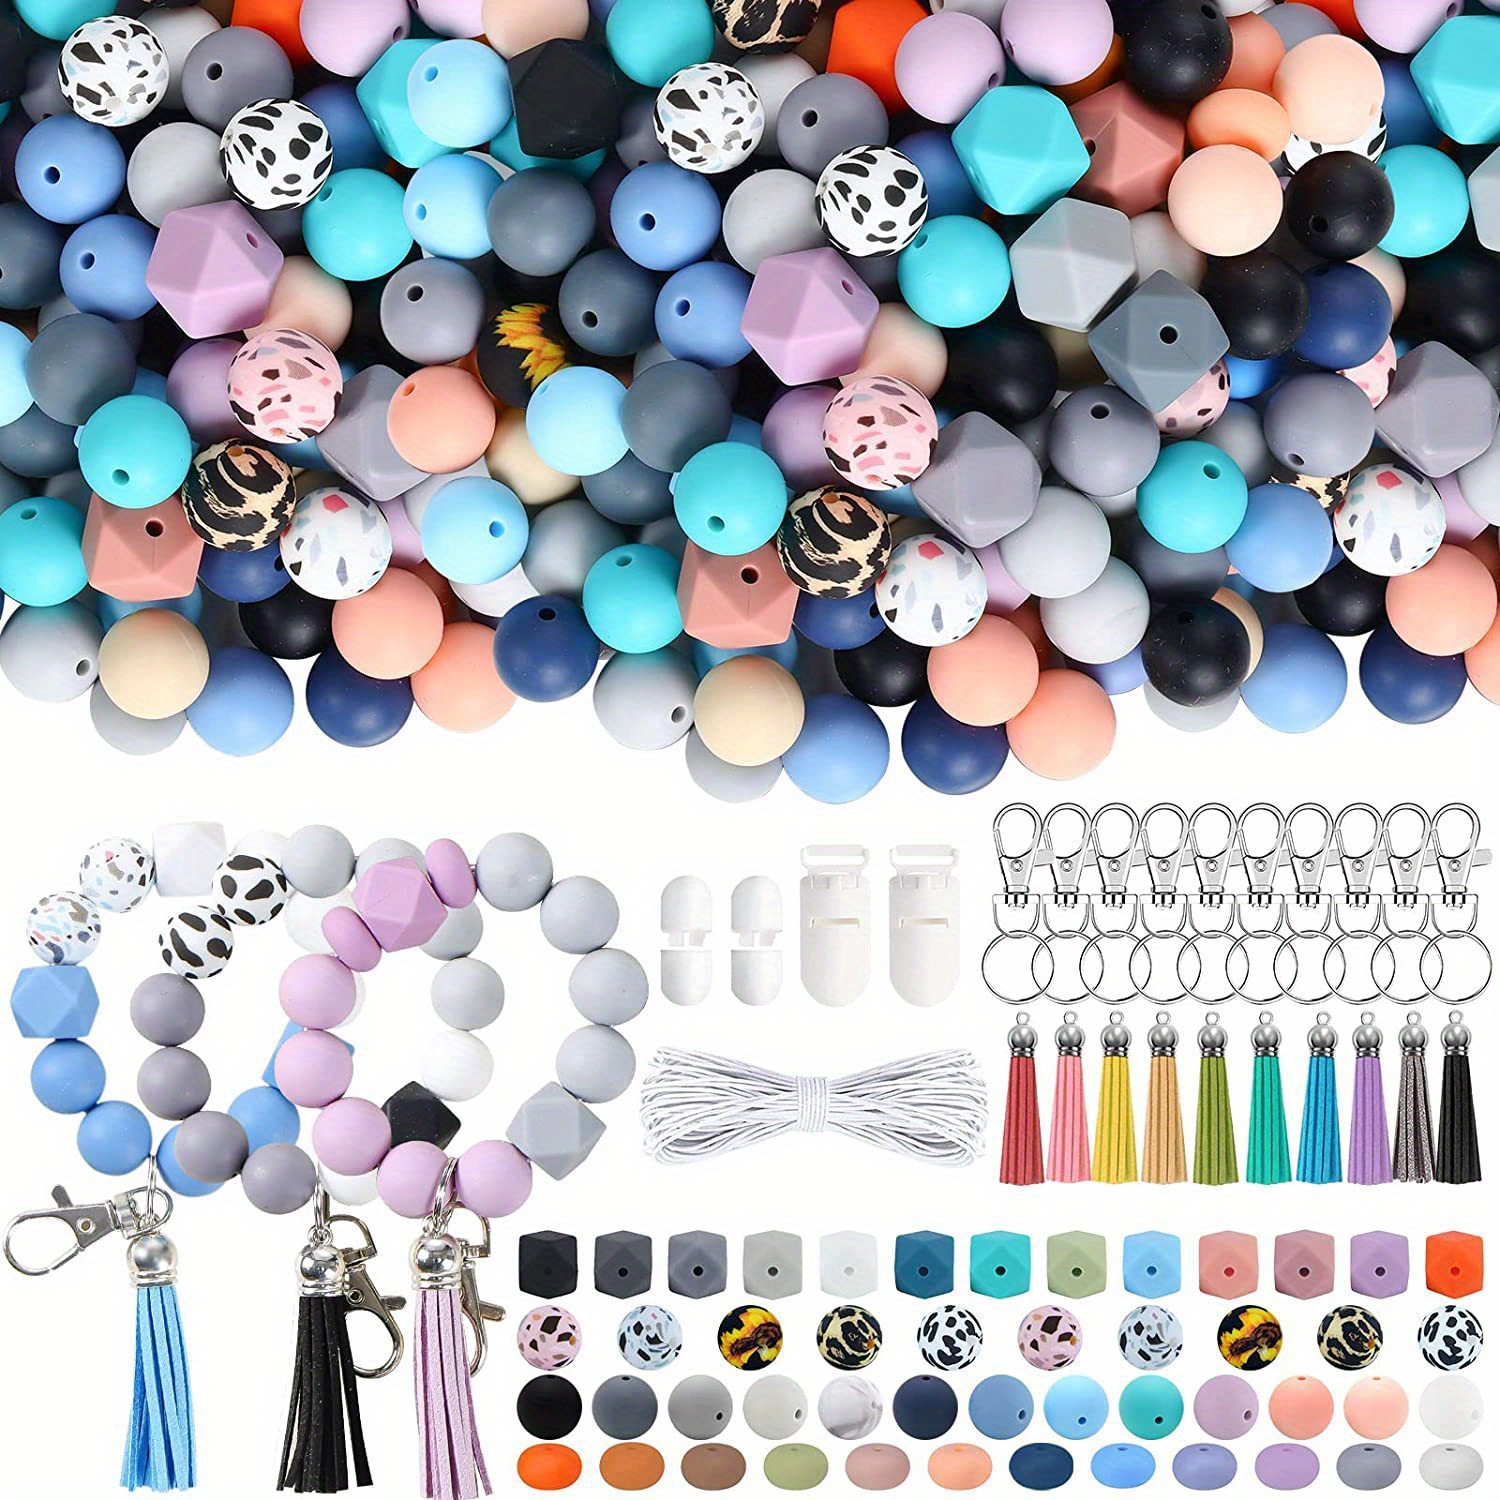 Silicone Beads, Silicone Loose Beads for Keychain Making Round Rubber Beads Polygonal for DIY Necklace Bracelet Jewelry, Women's, Size: One size